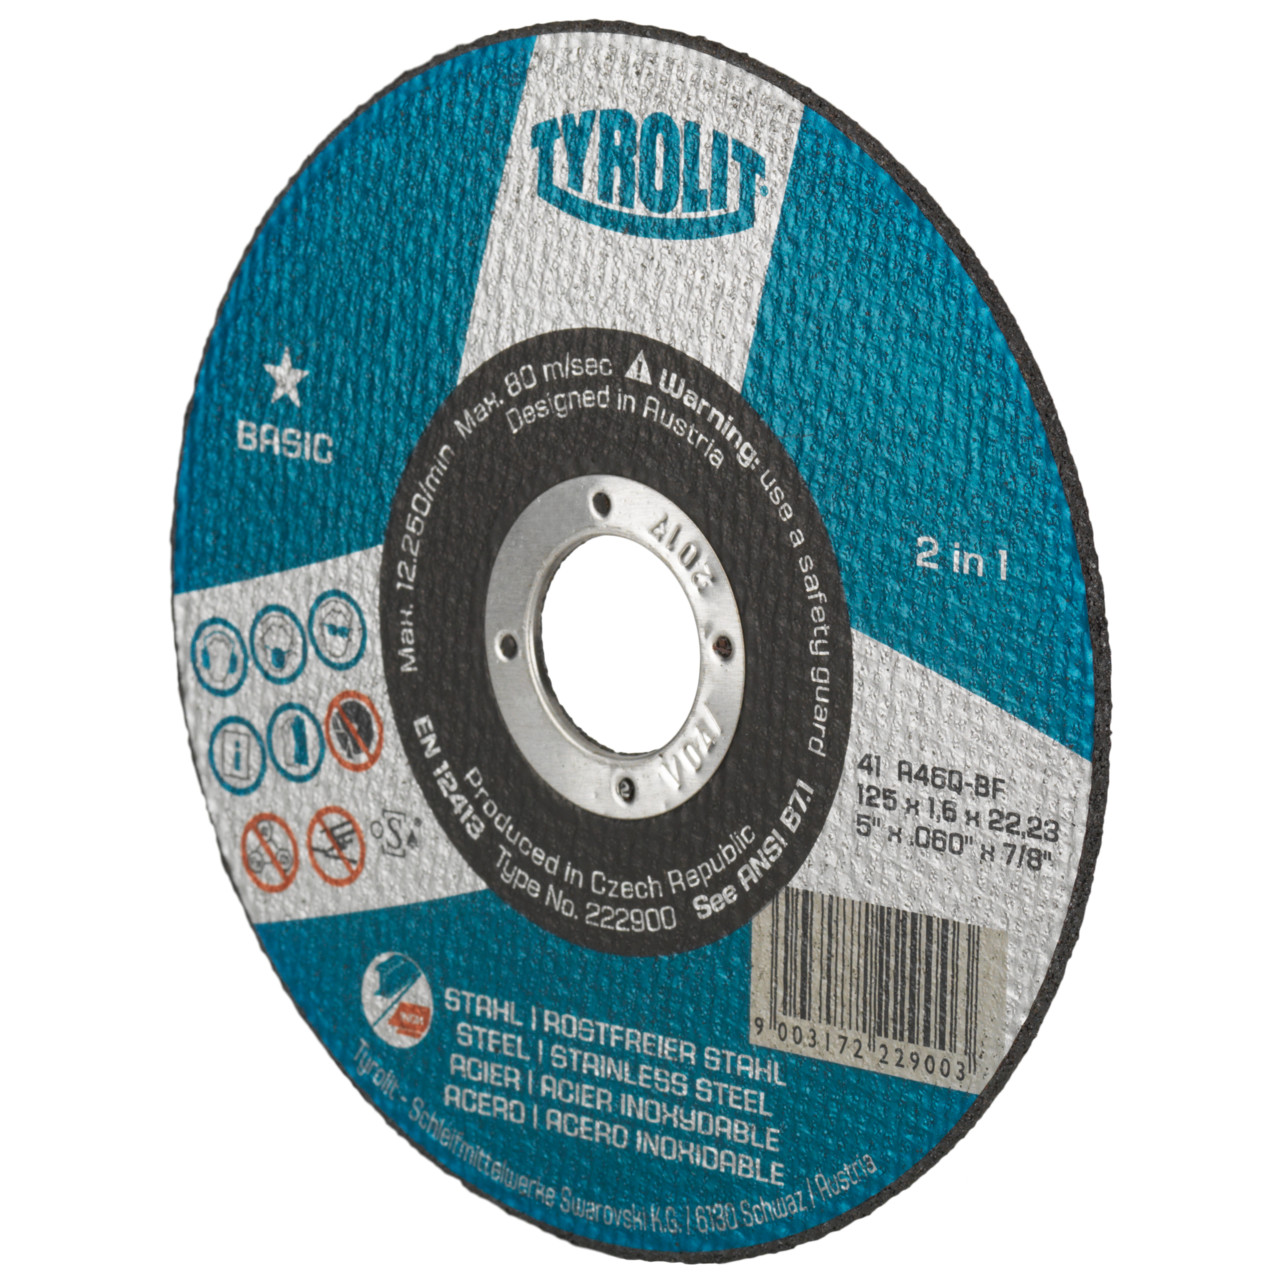 Tyrolit Cutting discs DxDxH 150x2.5x22.23 2in1 for steel and stainless steel, shape: 41 - straight version, Art. 222999